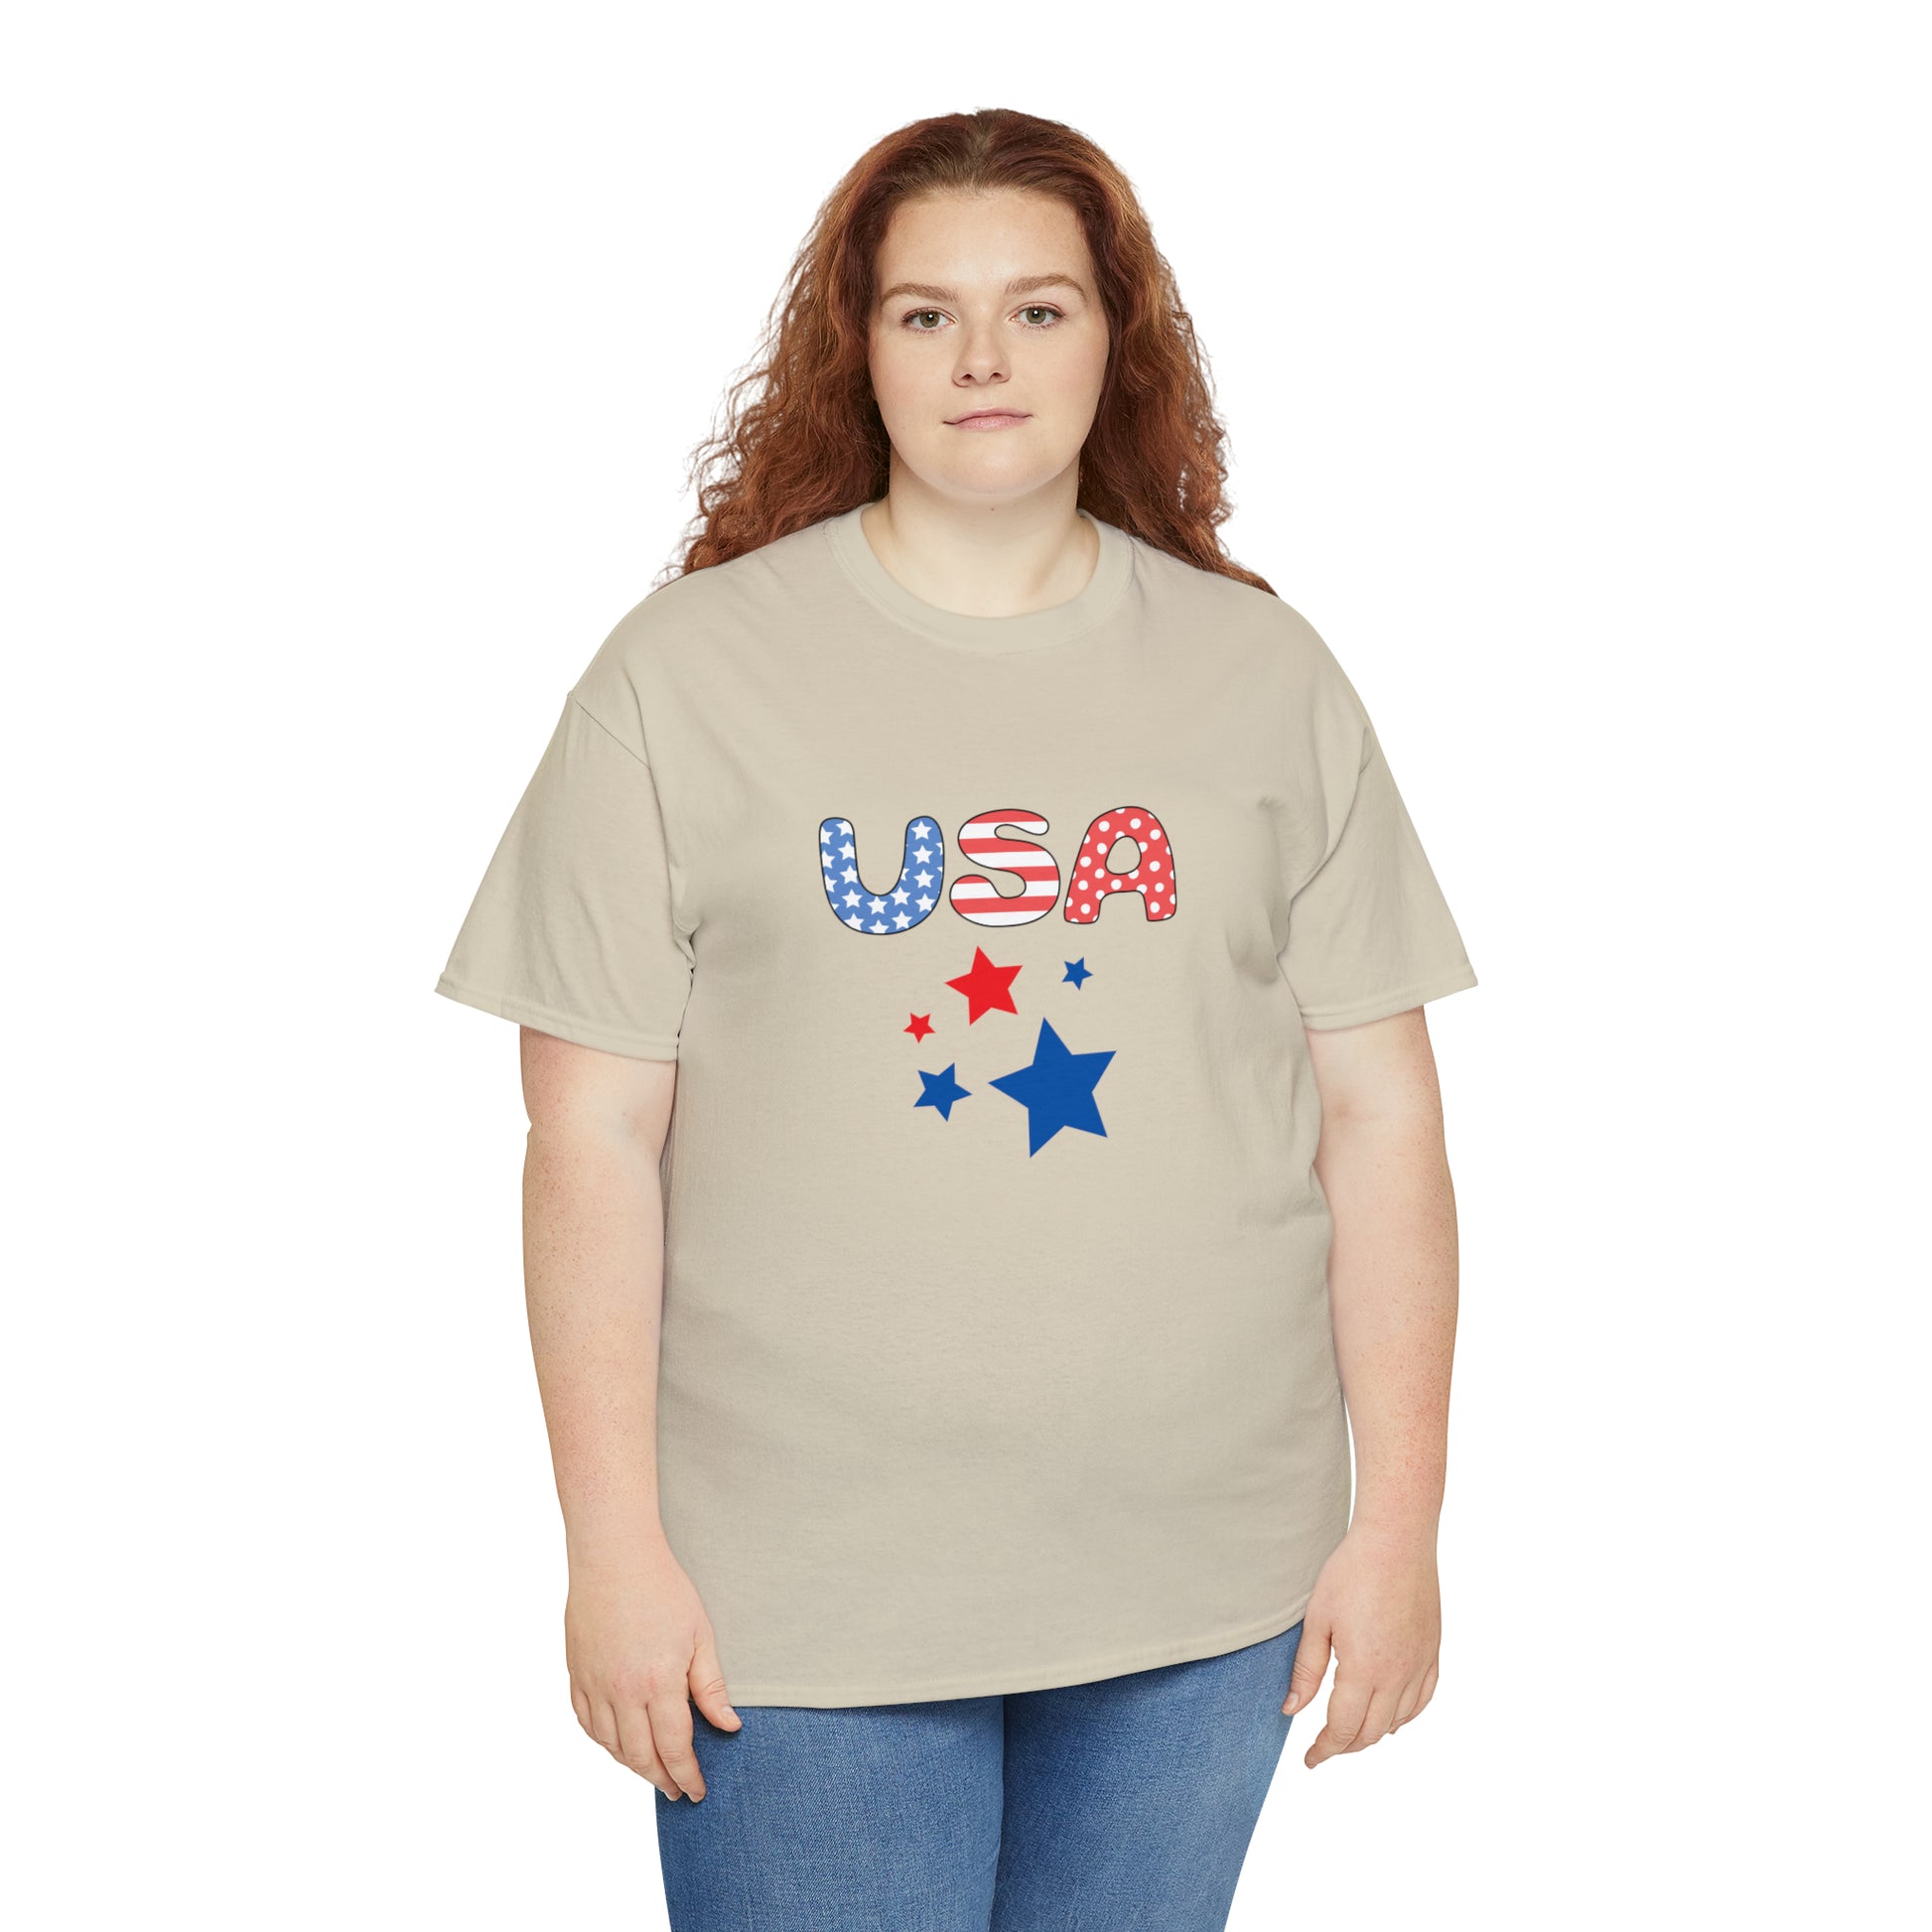 Mock up of a plus-size, red-haired, woman wearing the Sand t-shirt